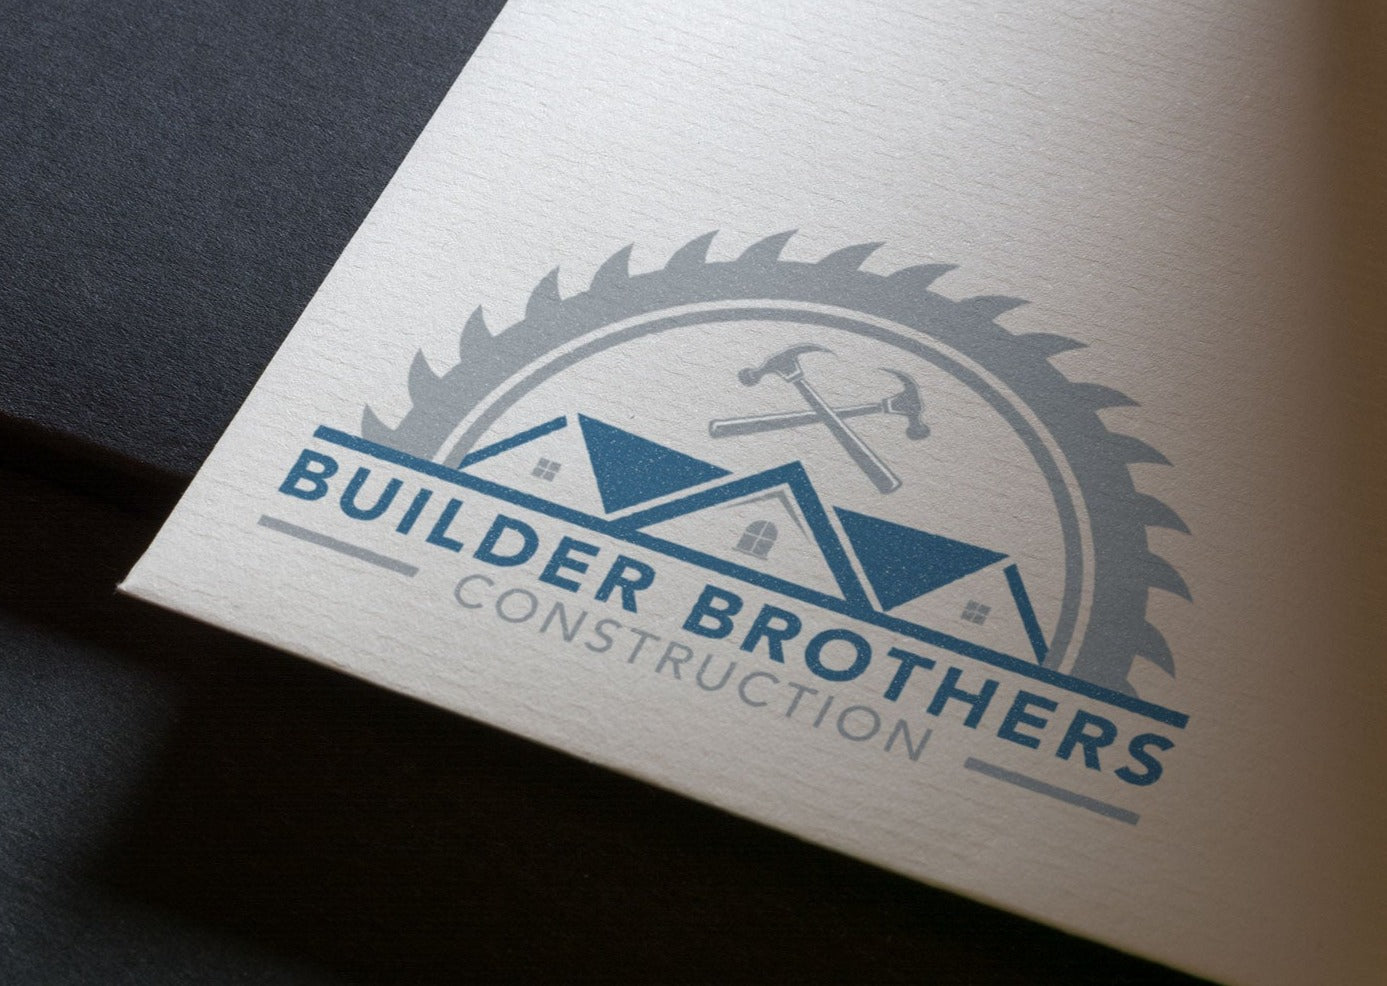 Construction Logo | Roofing Business | Real Estate Logo | Real Estate Business | Construction Company | Roofing Logo | Roofers | Real Estate Agent